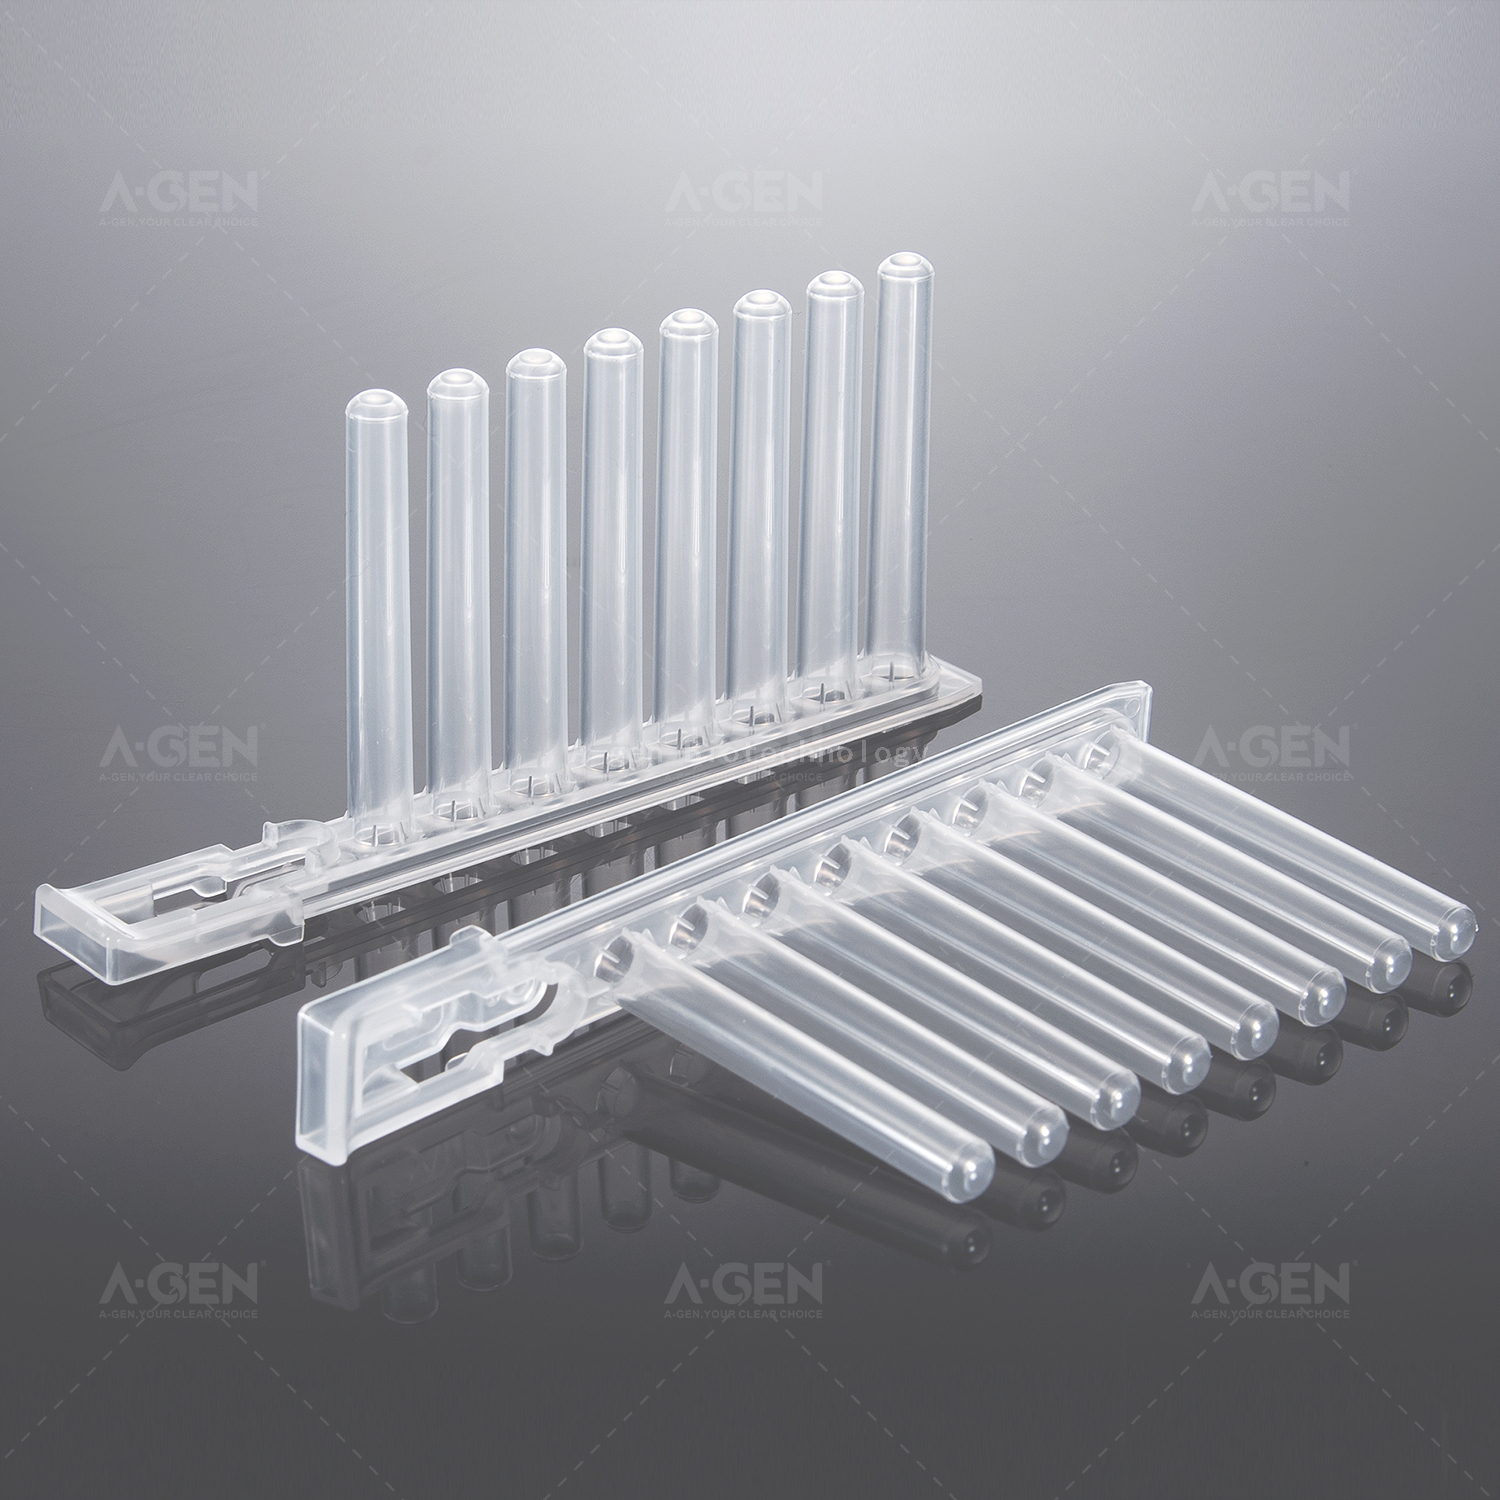 8-Strip Tip Rod Magnet Sleeve for 96 Deep Well Plate RNa Extraction Plate Nucleic Acid Pure